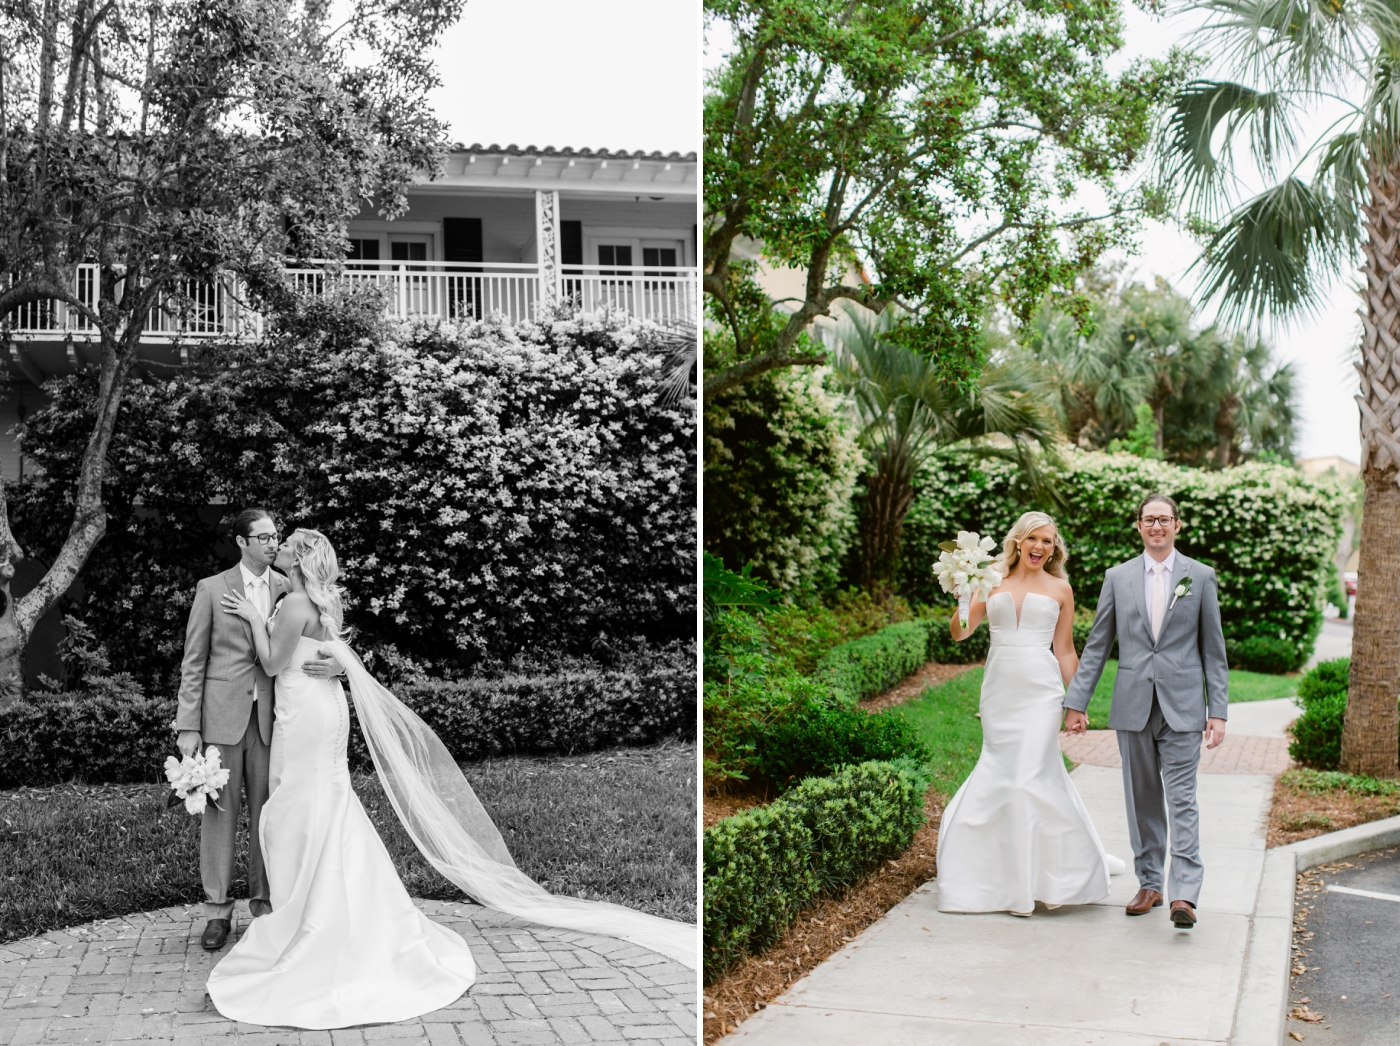 Bride and groom first look at St. Simons Island Lighthouse Lawn